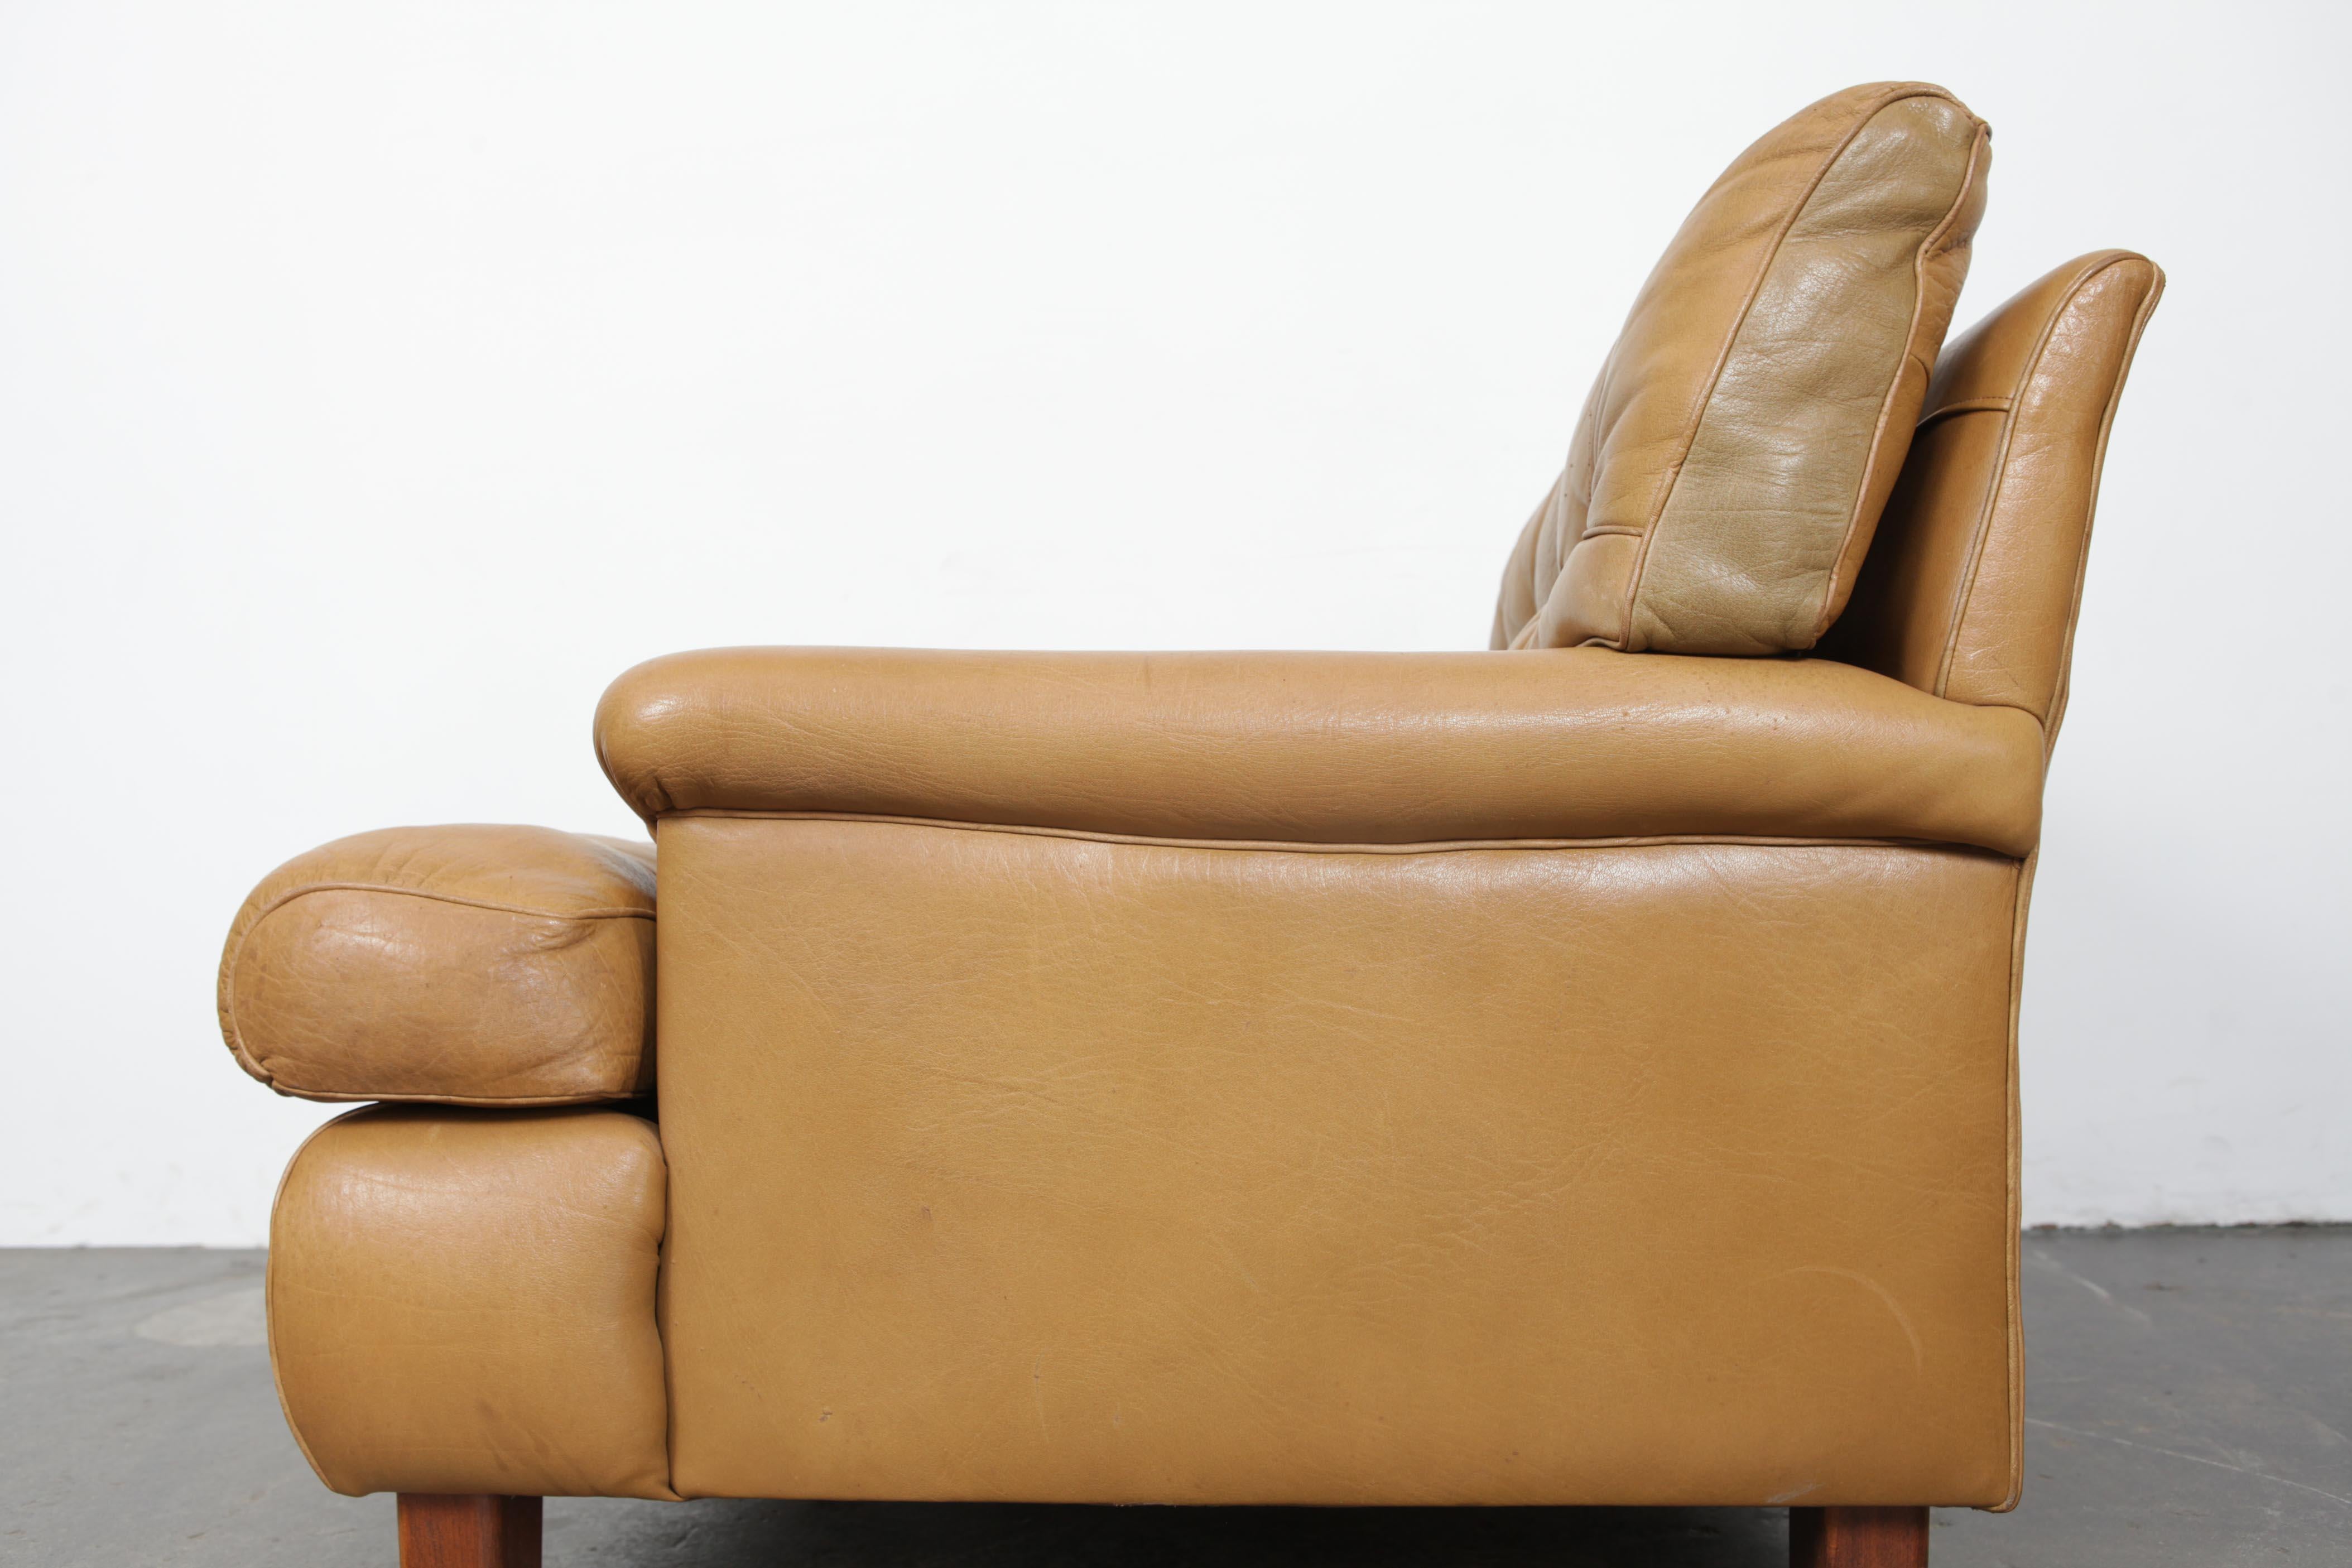 Arne Norell Tan Leather Tufted and Paneled Lounge Chair by Norell AB 4